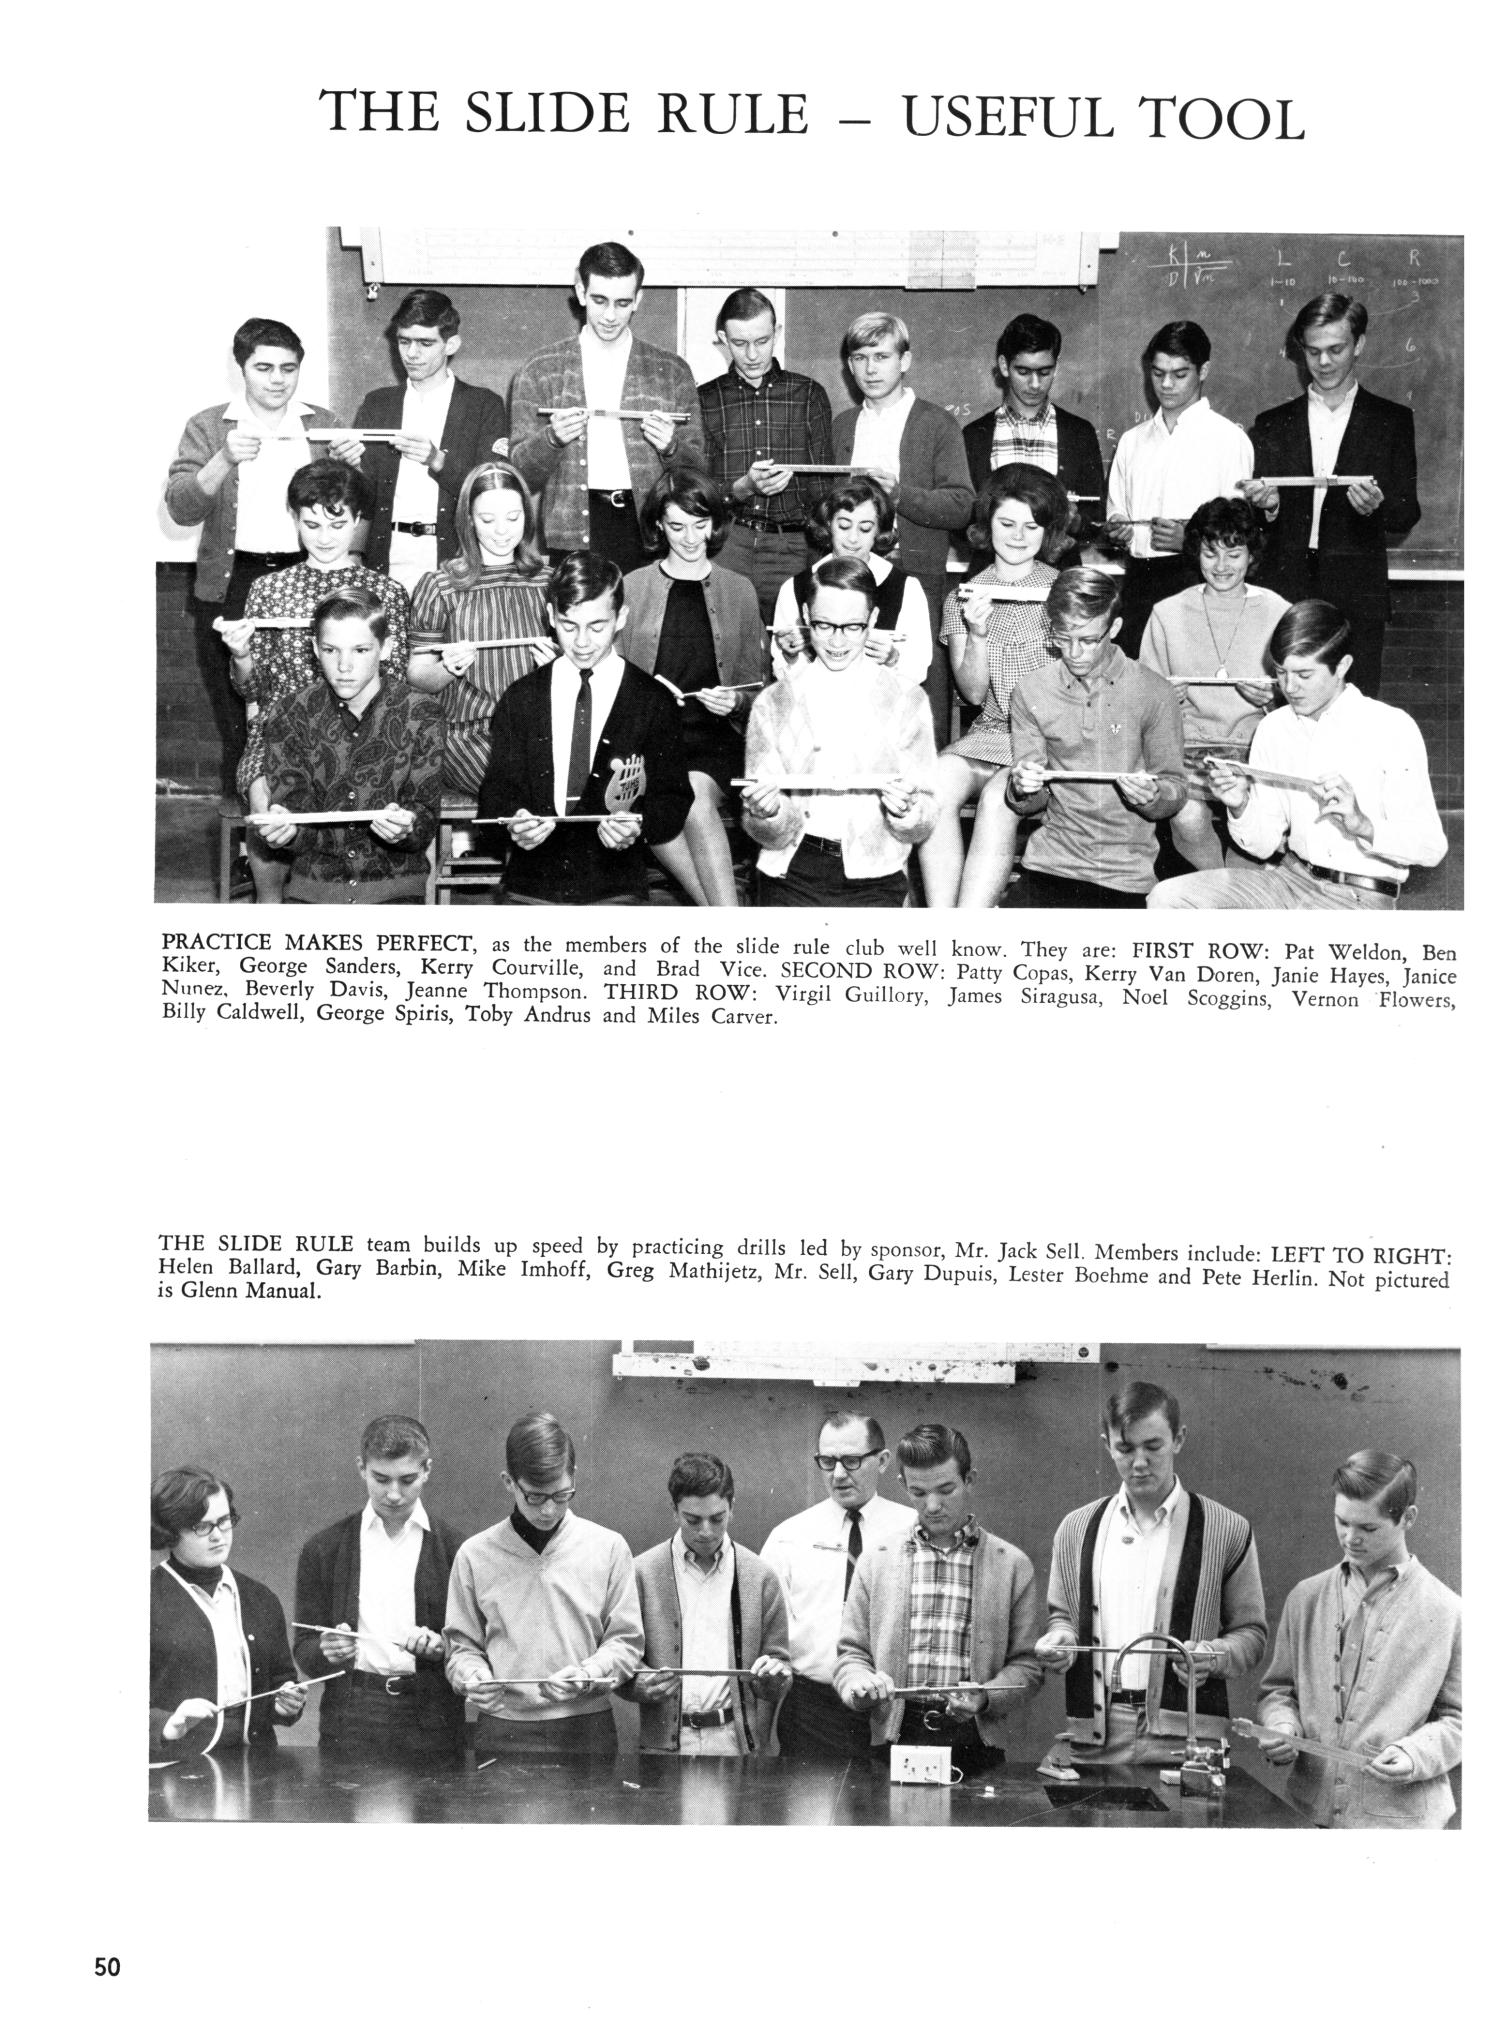 The Yellow Jacket, Yearbook of Thomas Jefferson High School, 1968
                                                
                                                    50
                                                